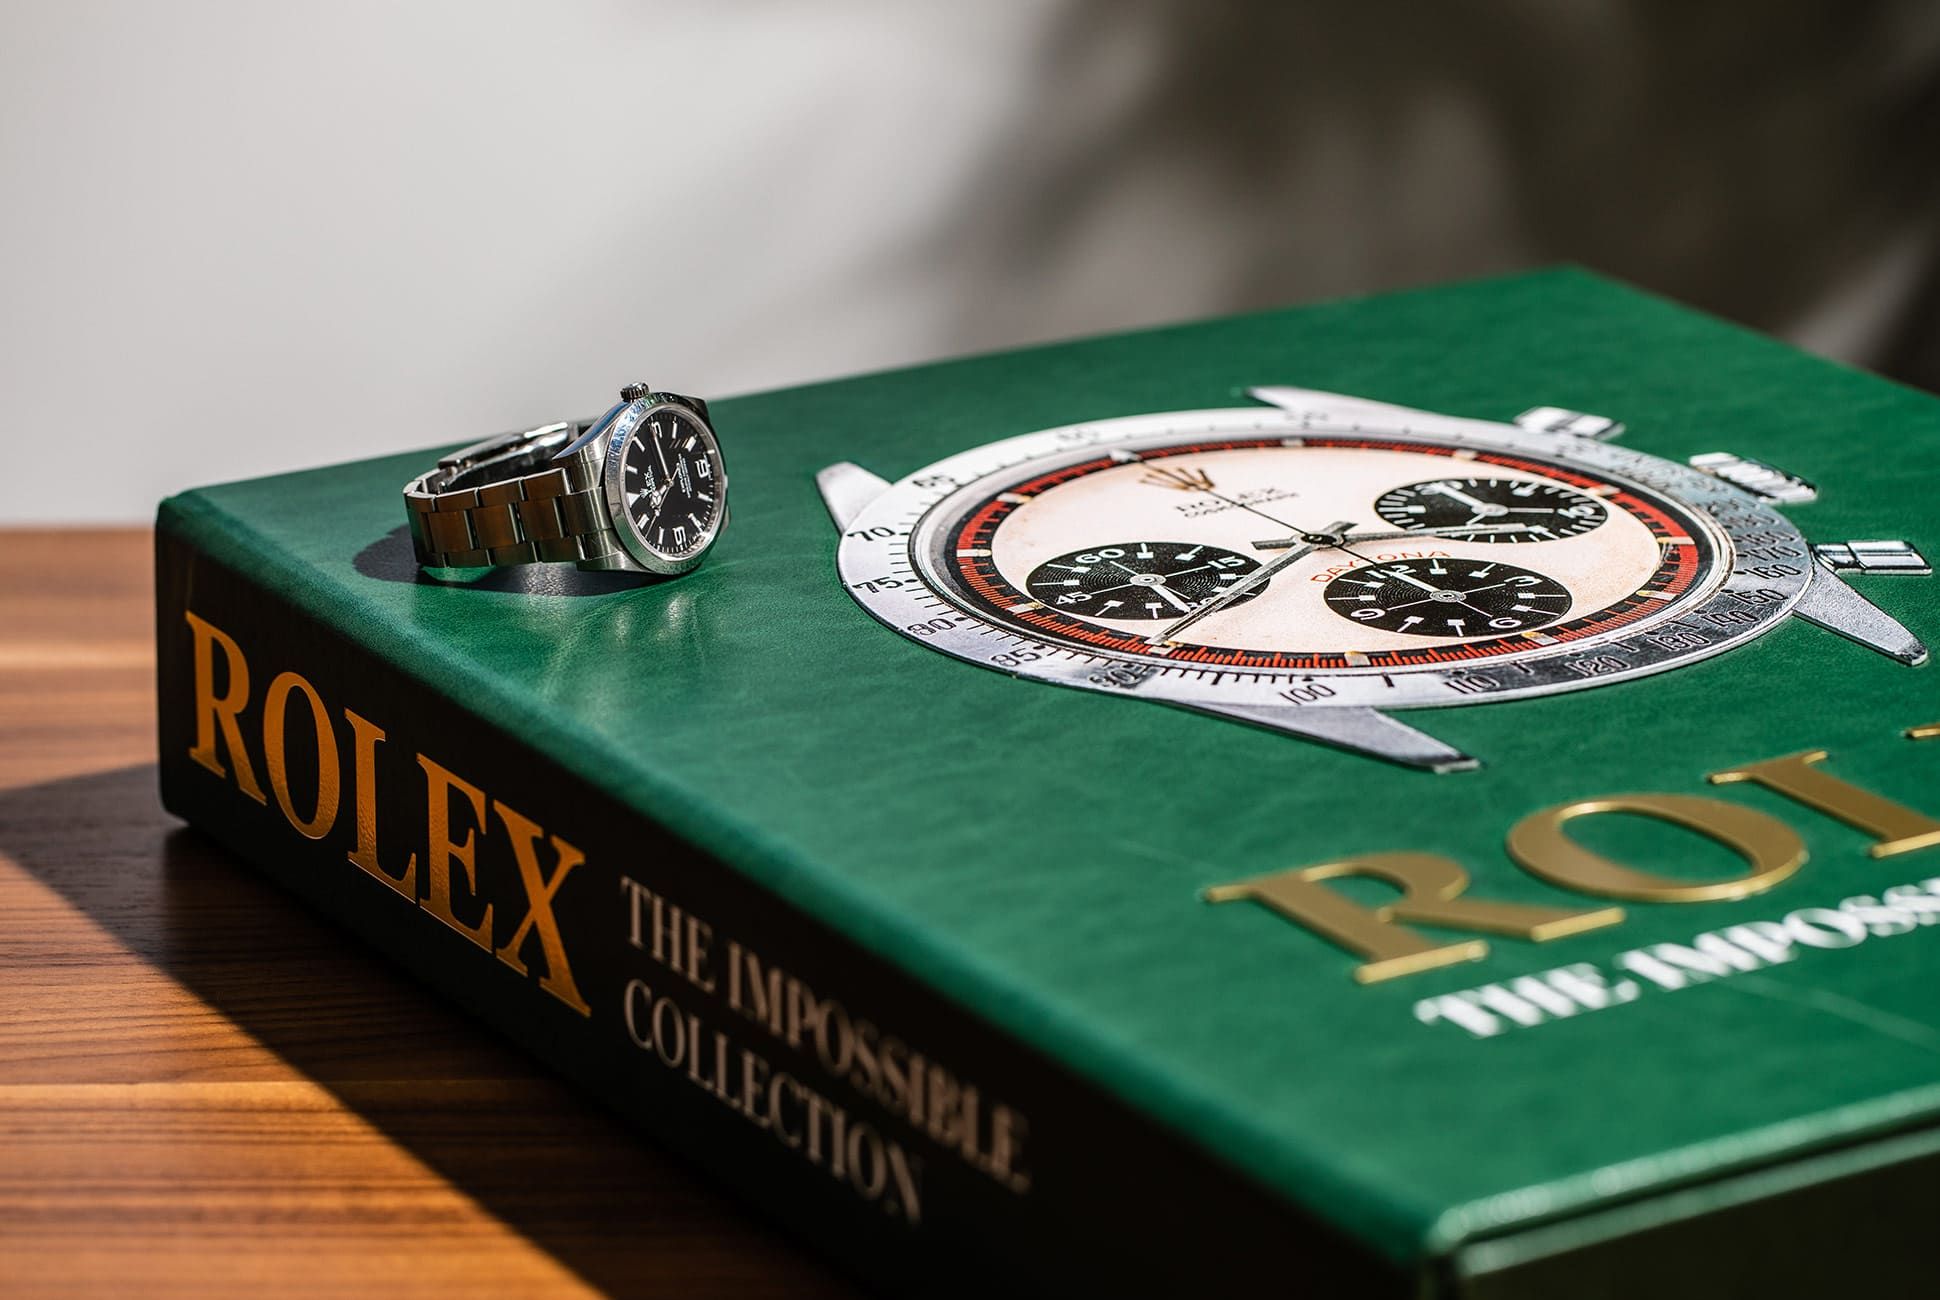 This New Rolex Book is a Look At Some of The Brand's Most Iconic Watches